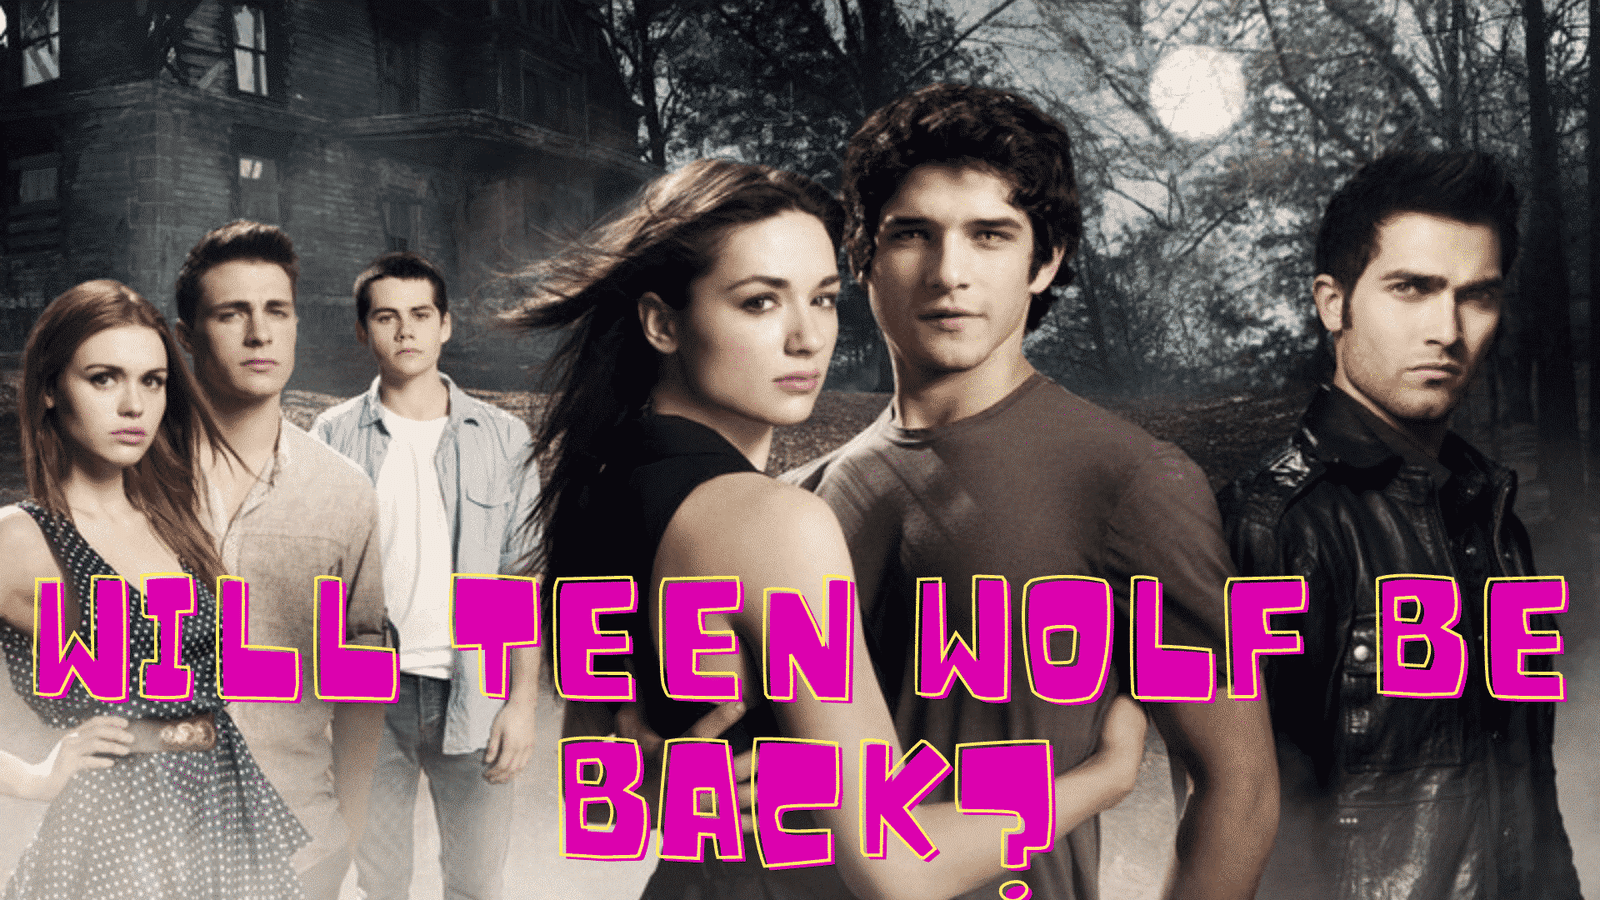 Will Teen Wolf Be Back?